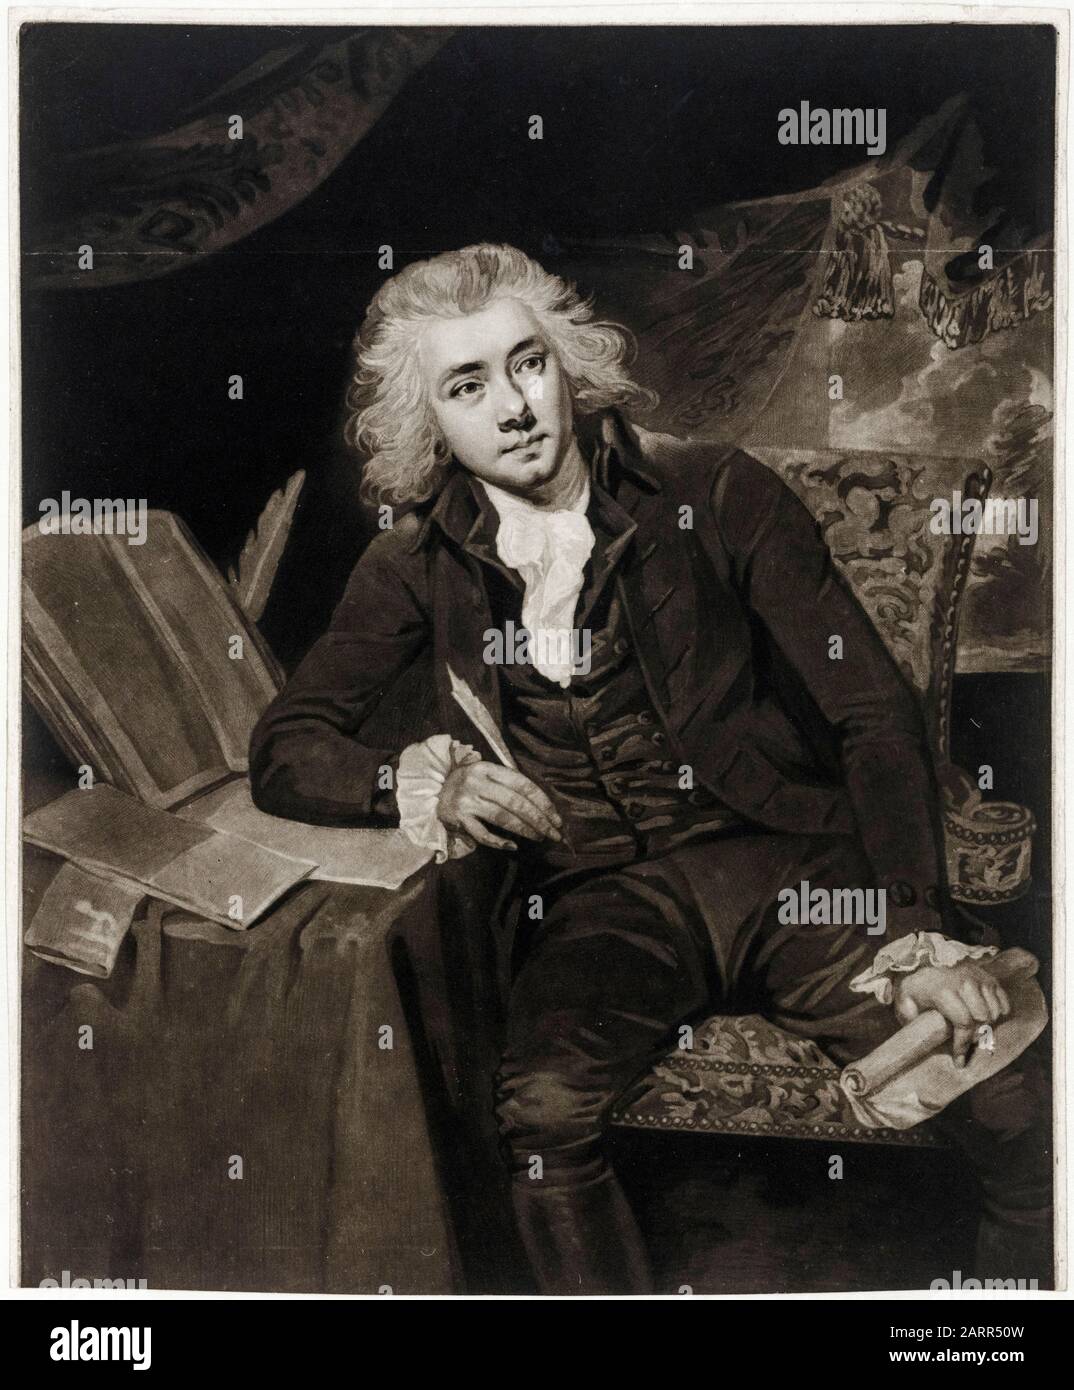 William Wilberforce, (1759-1833) leader of the movement to abolish the slave trade, portrait print 1792 Stock Photo